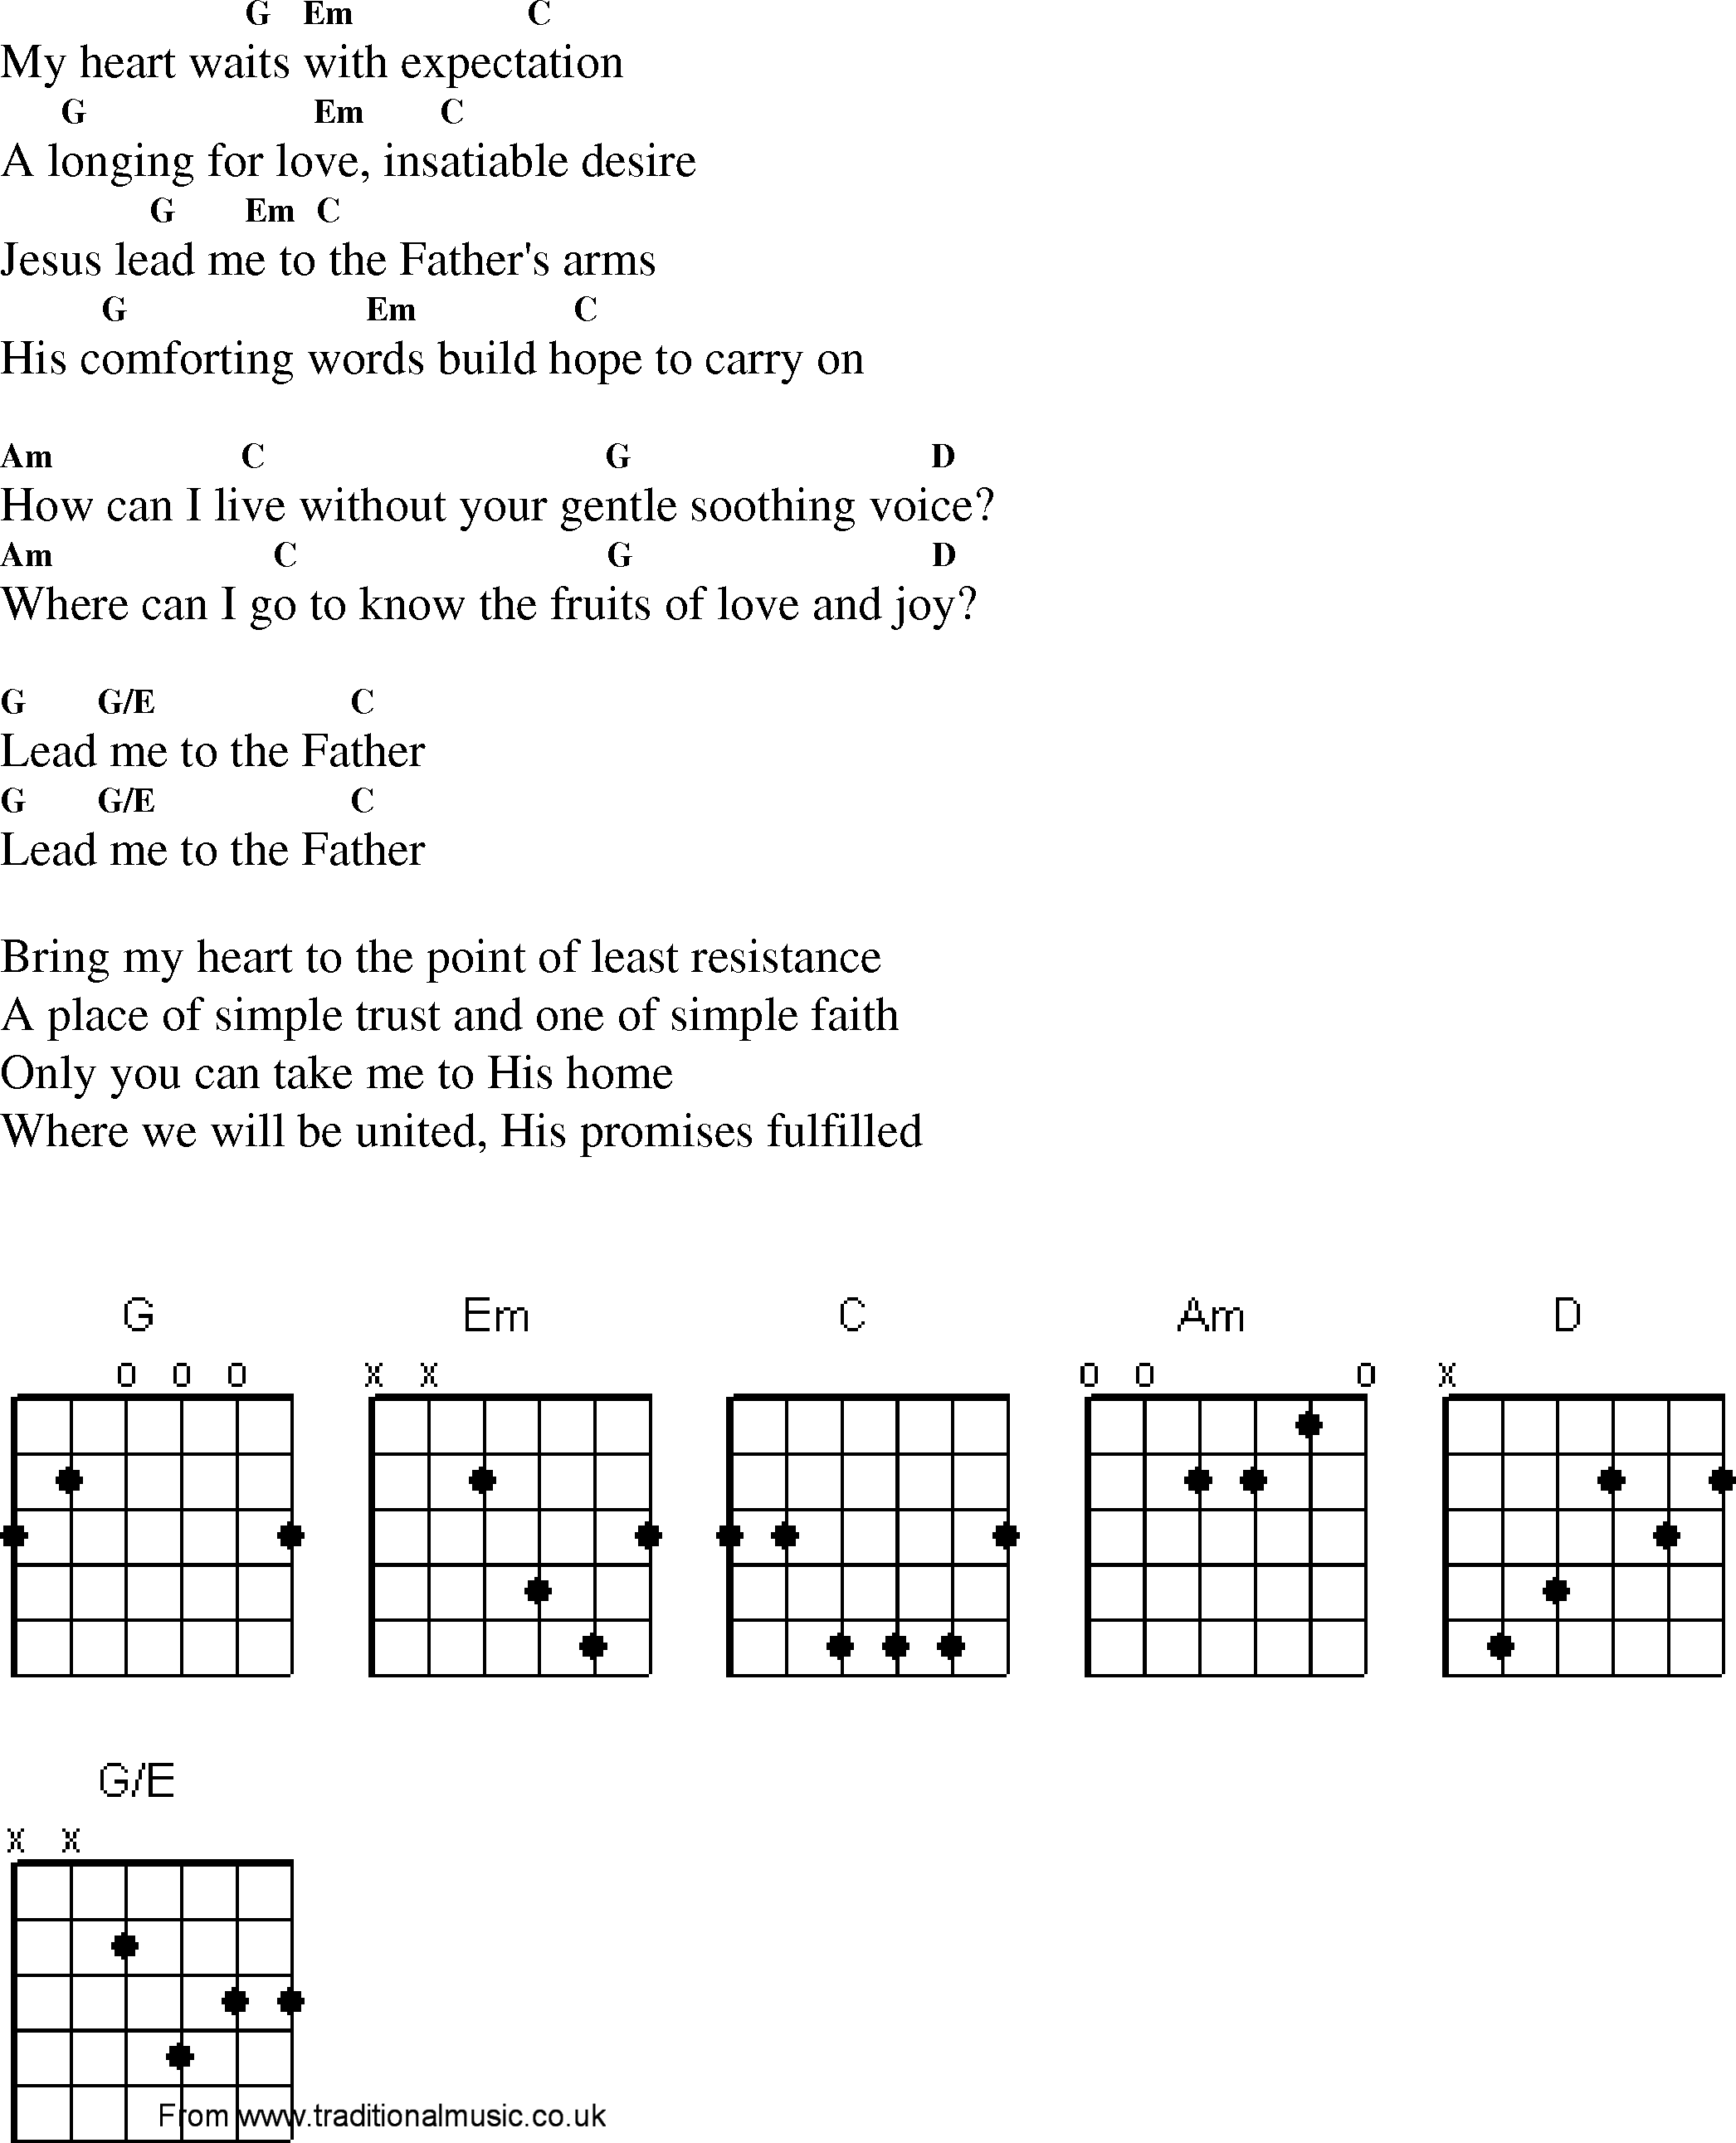 Gospel Song: lead_me_to_the_father, lyrics and chords.